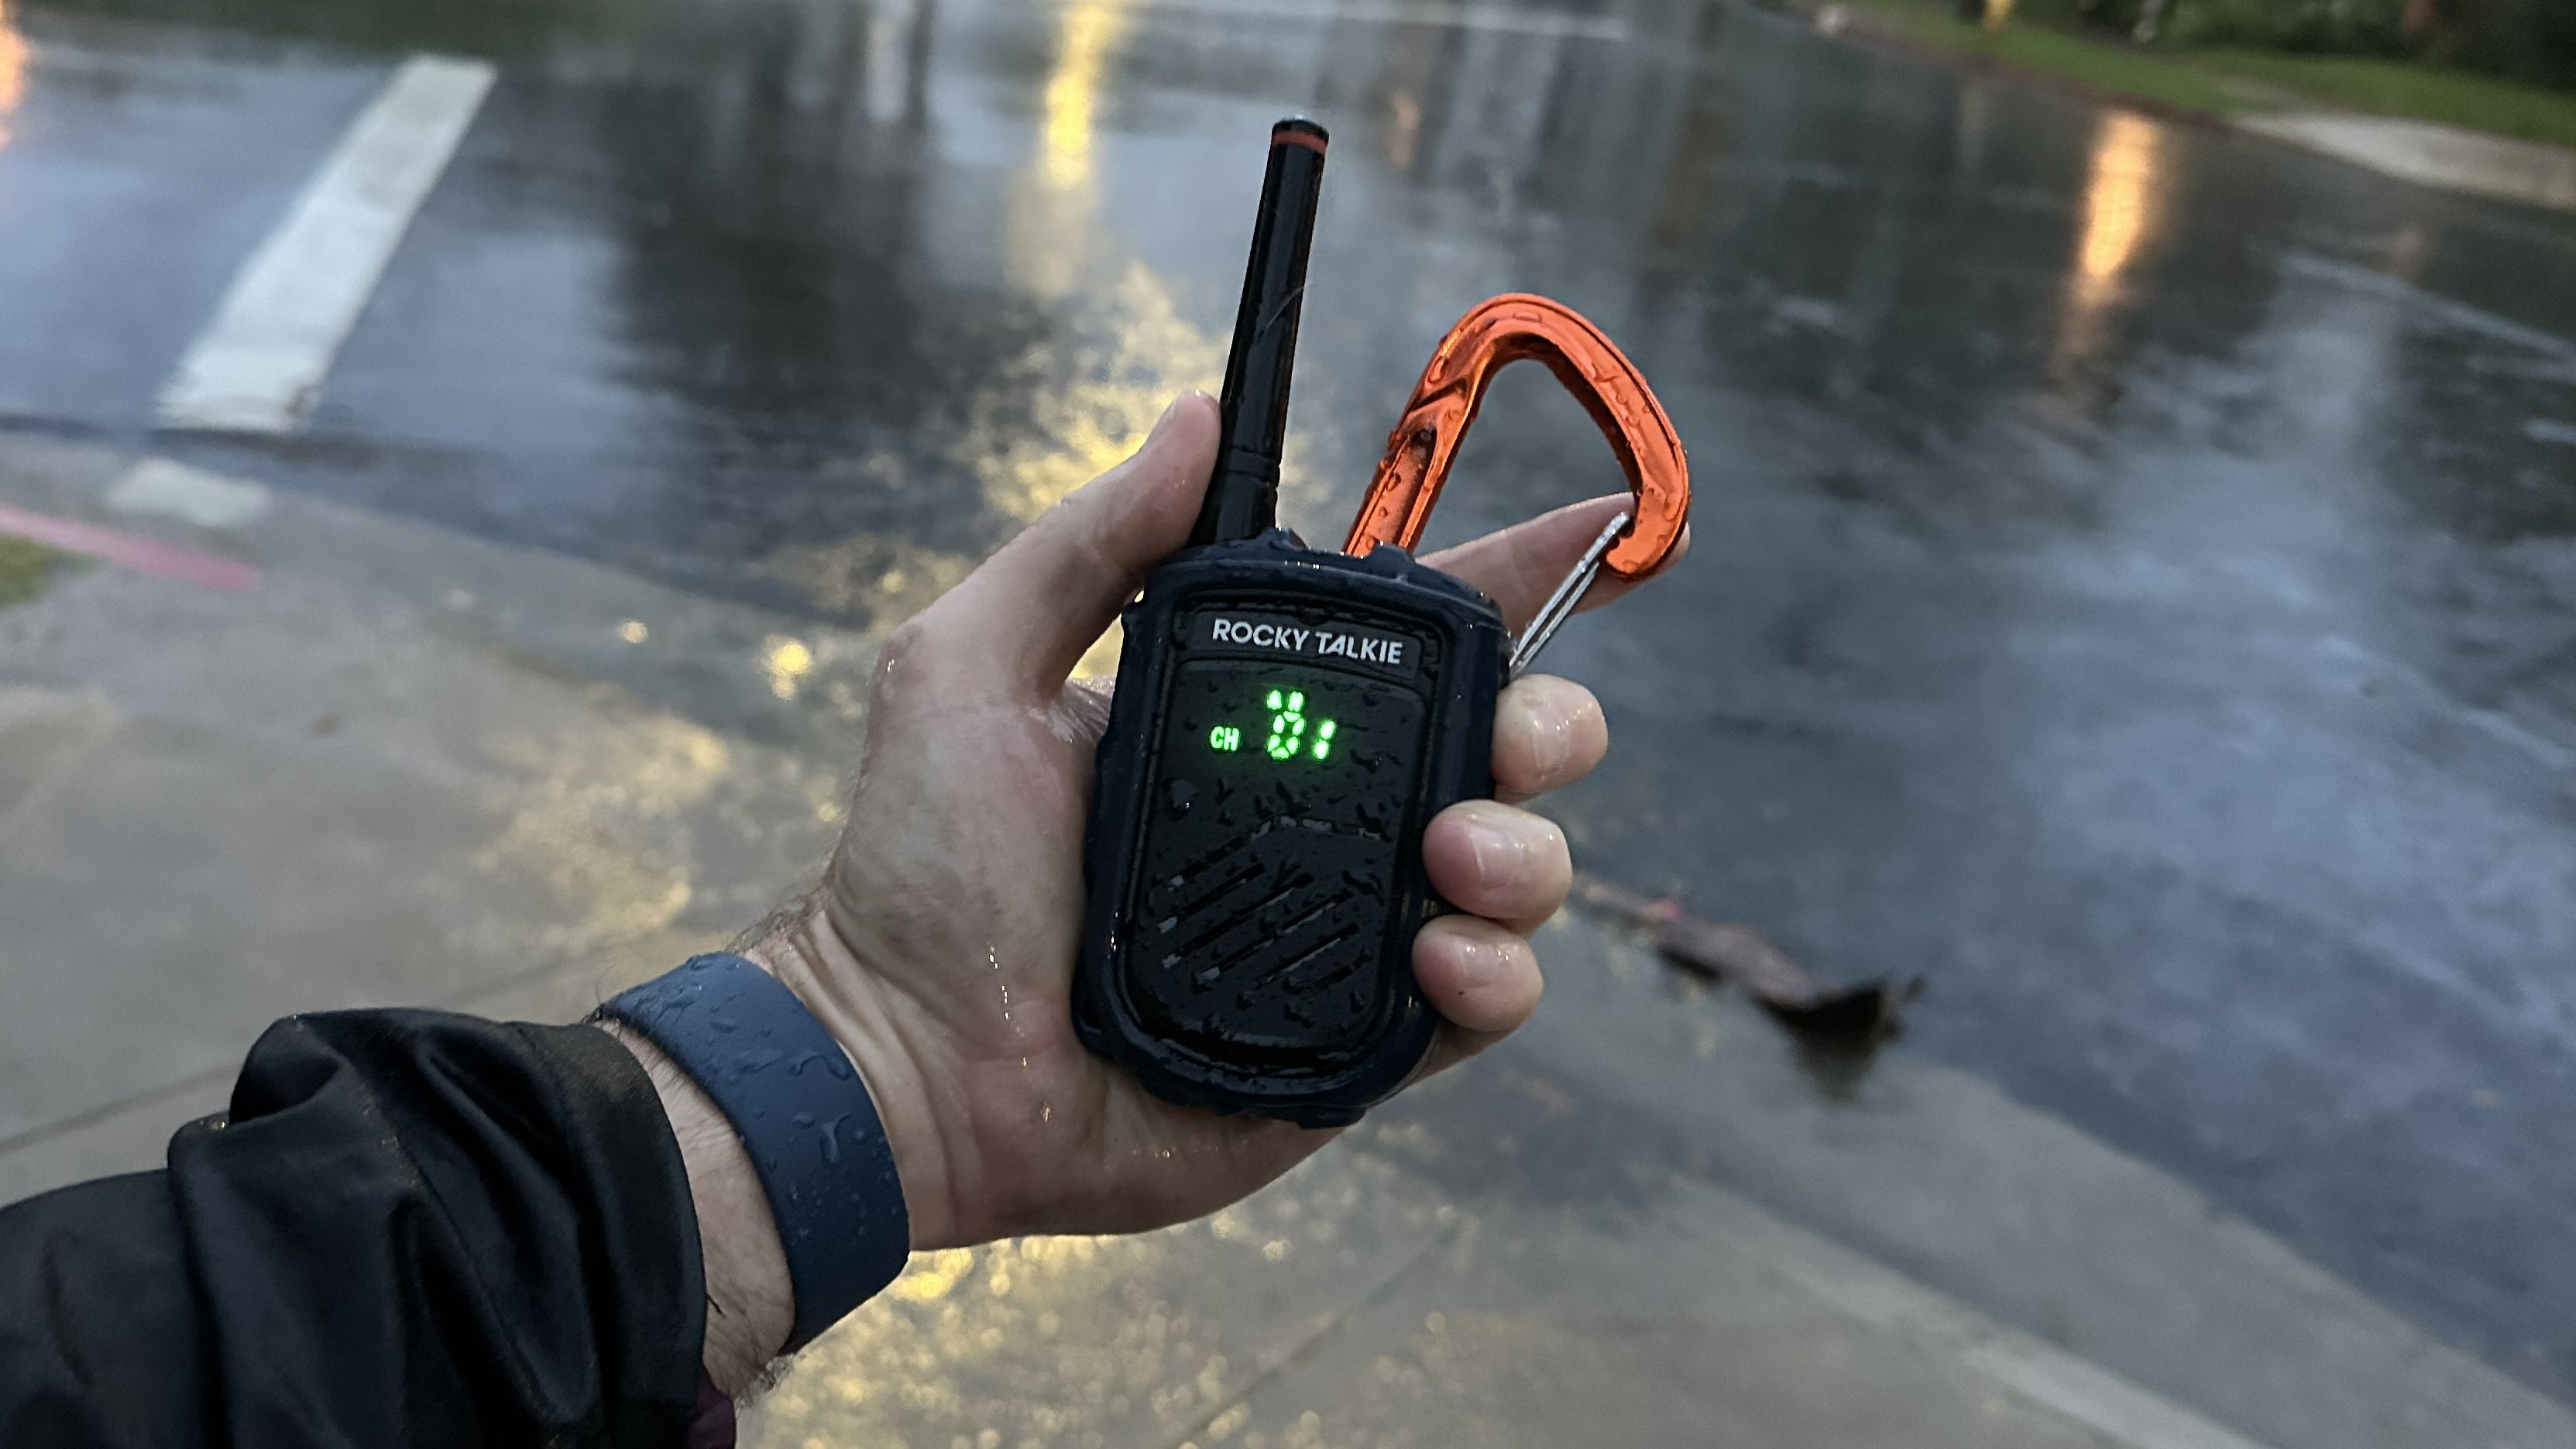 The 5 Best Walkie Talkies (2023 Review) - This Old House